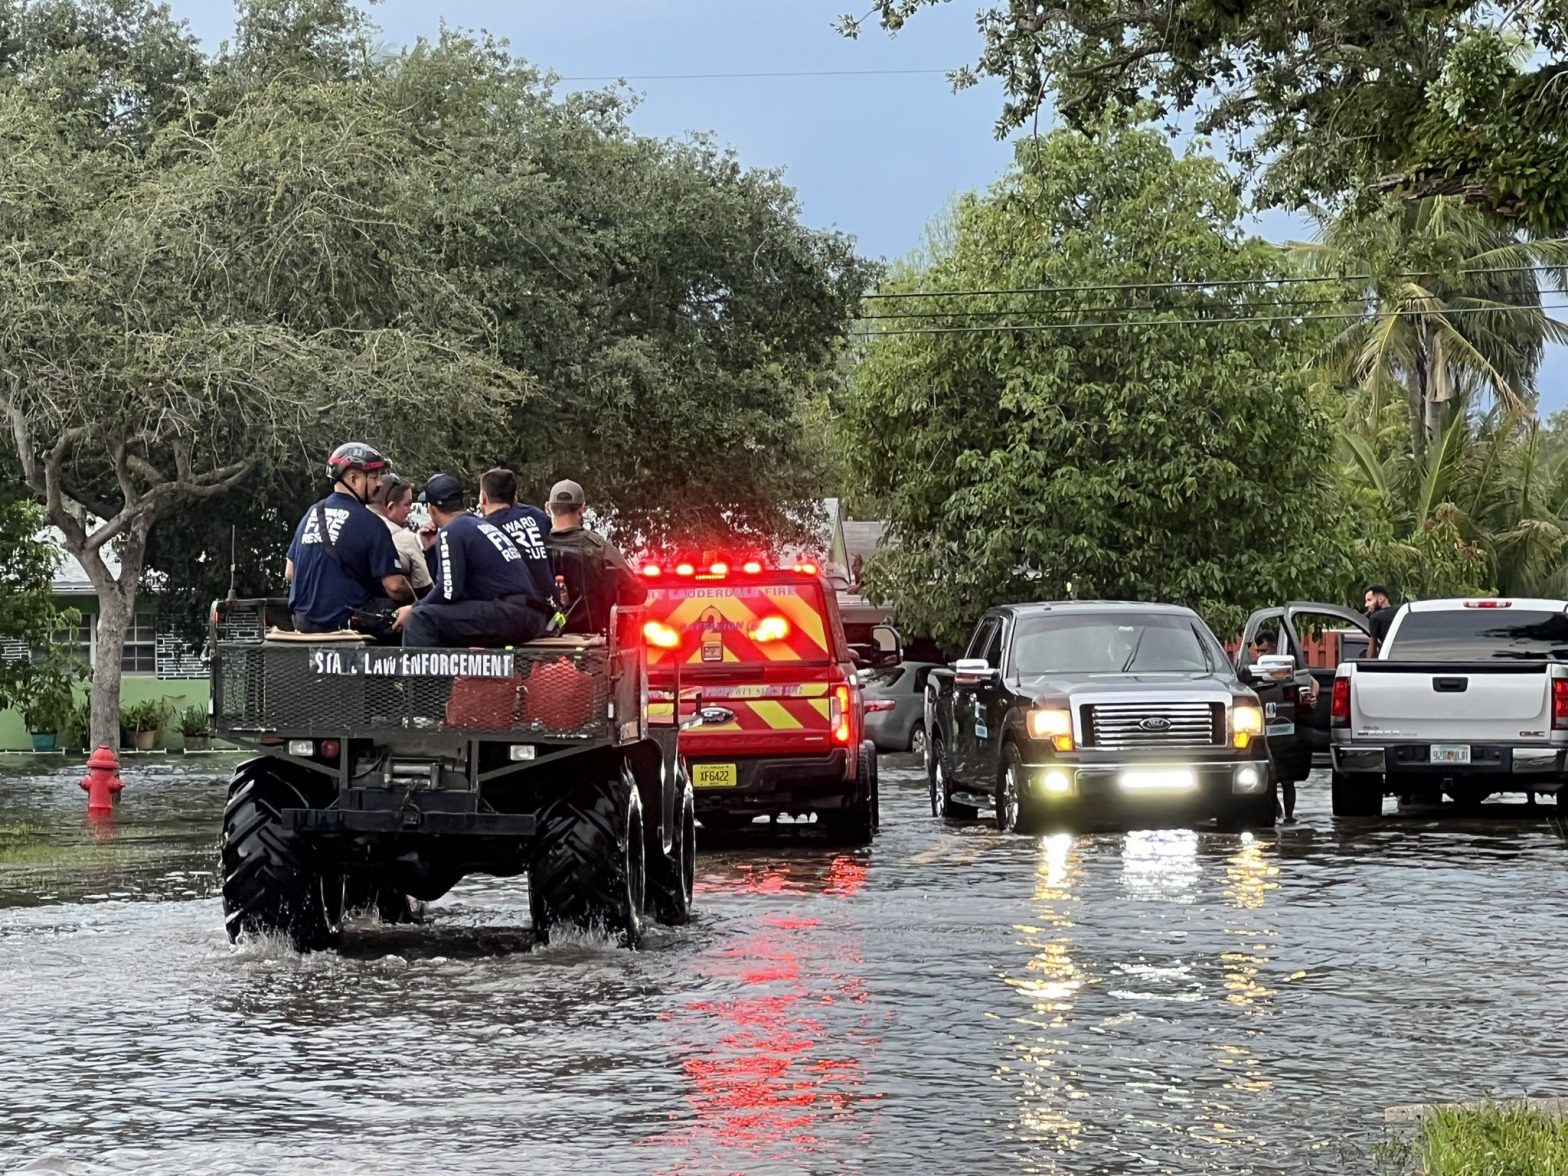 Fort Lauderdale flood pictures and videos: Visuals show ‘historic’ water-logging in Florida city